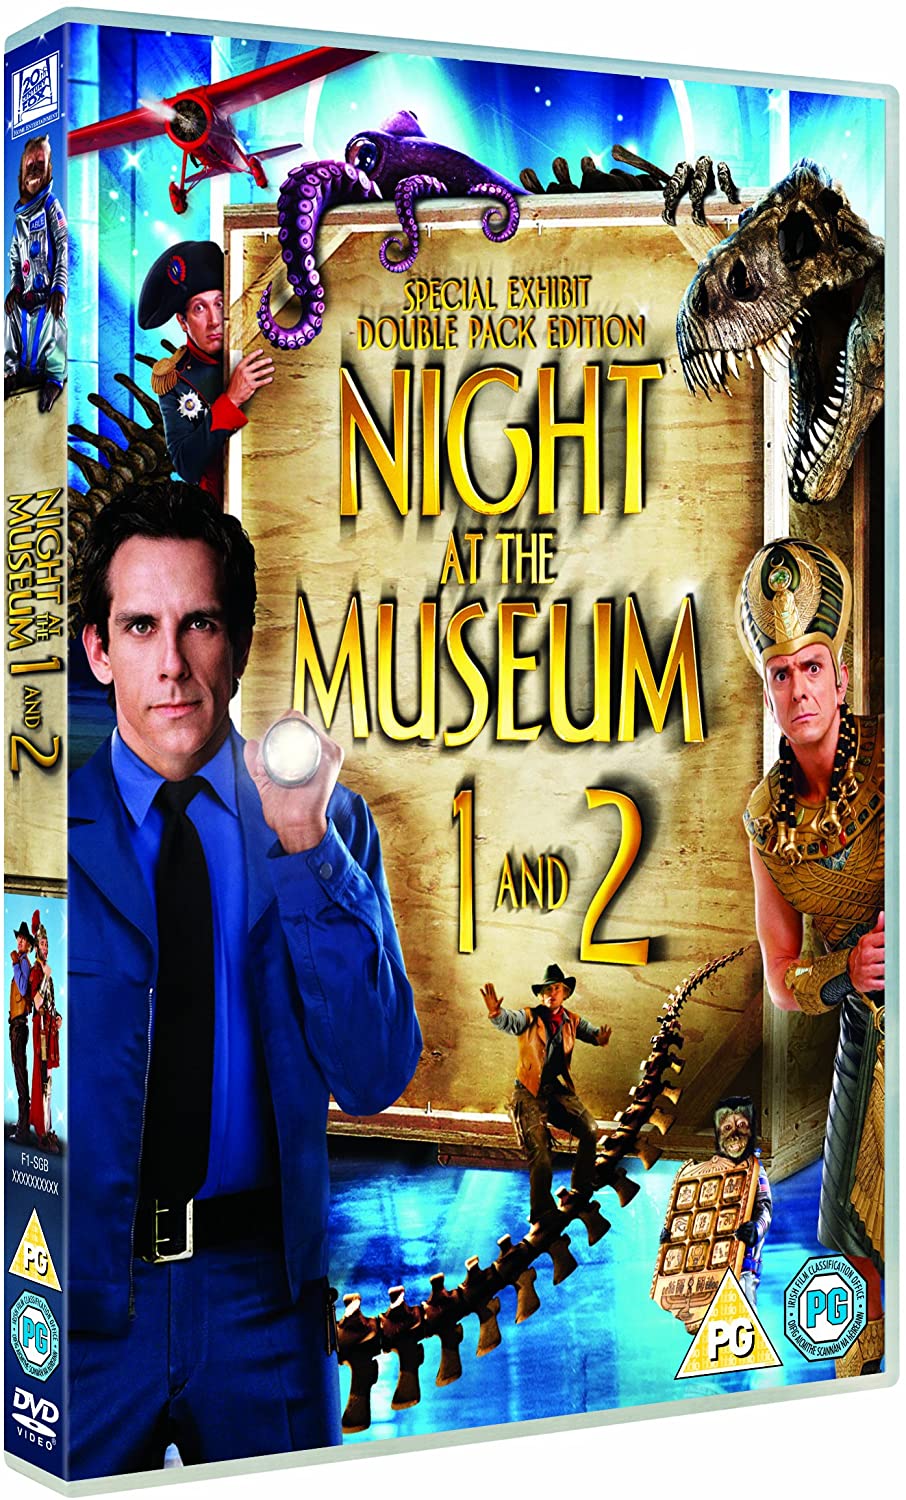 Night at the Museum / Night at the Museum 2 Double Pack [2006]